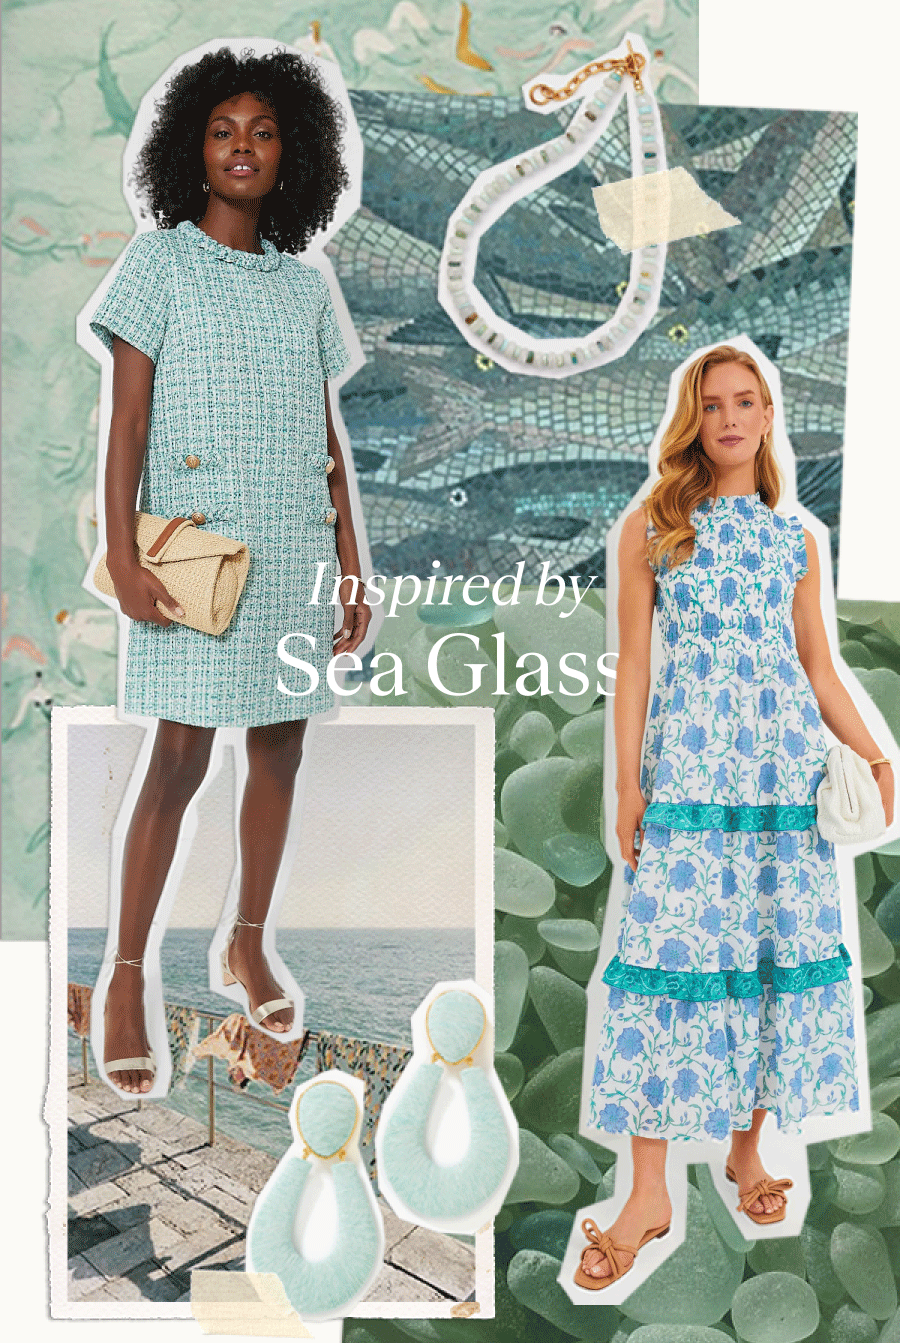 Inspired by Sea Glass